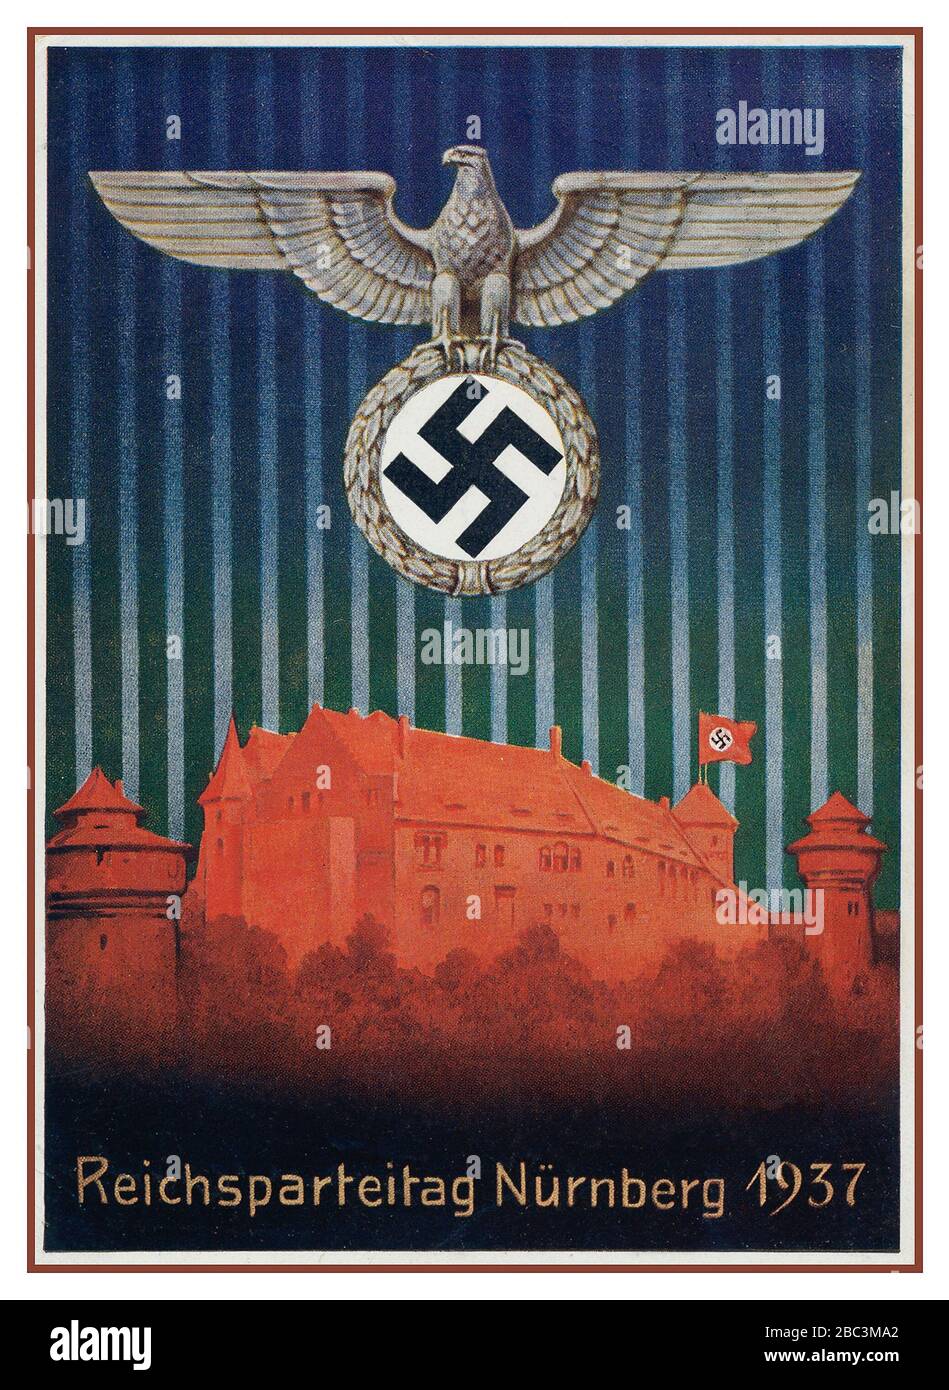 Archive 1930s Nazi Propaganda Poster Reichsparteitag Nürnberg Germany with German Eagle holding Swastika symbol above Nurnberg Castle with Swastika Flag flying Stock Photo